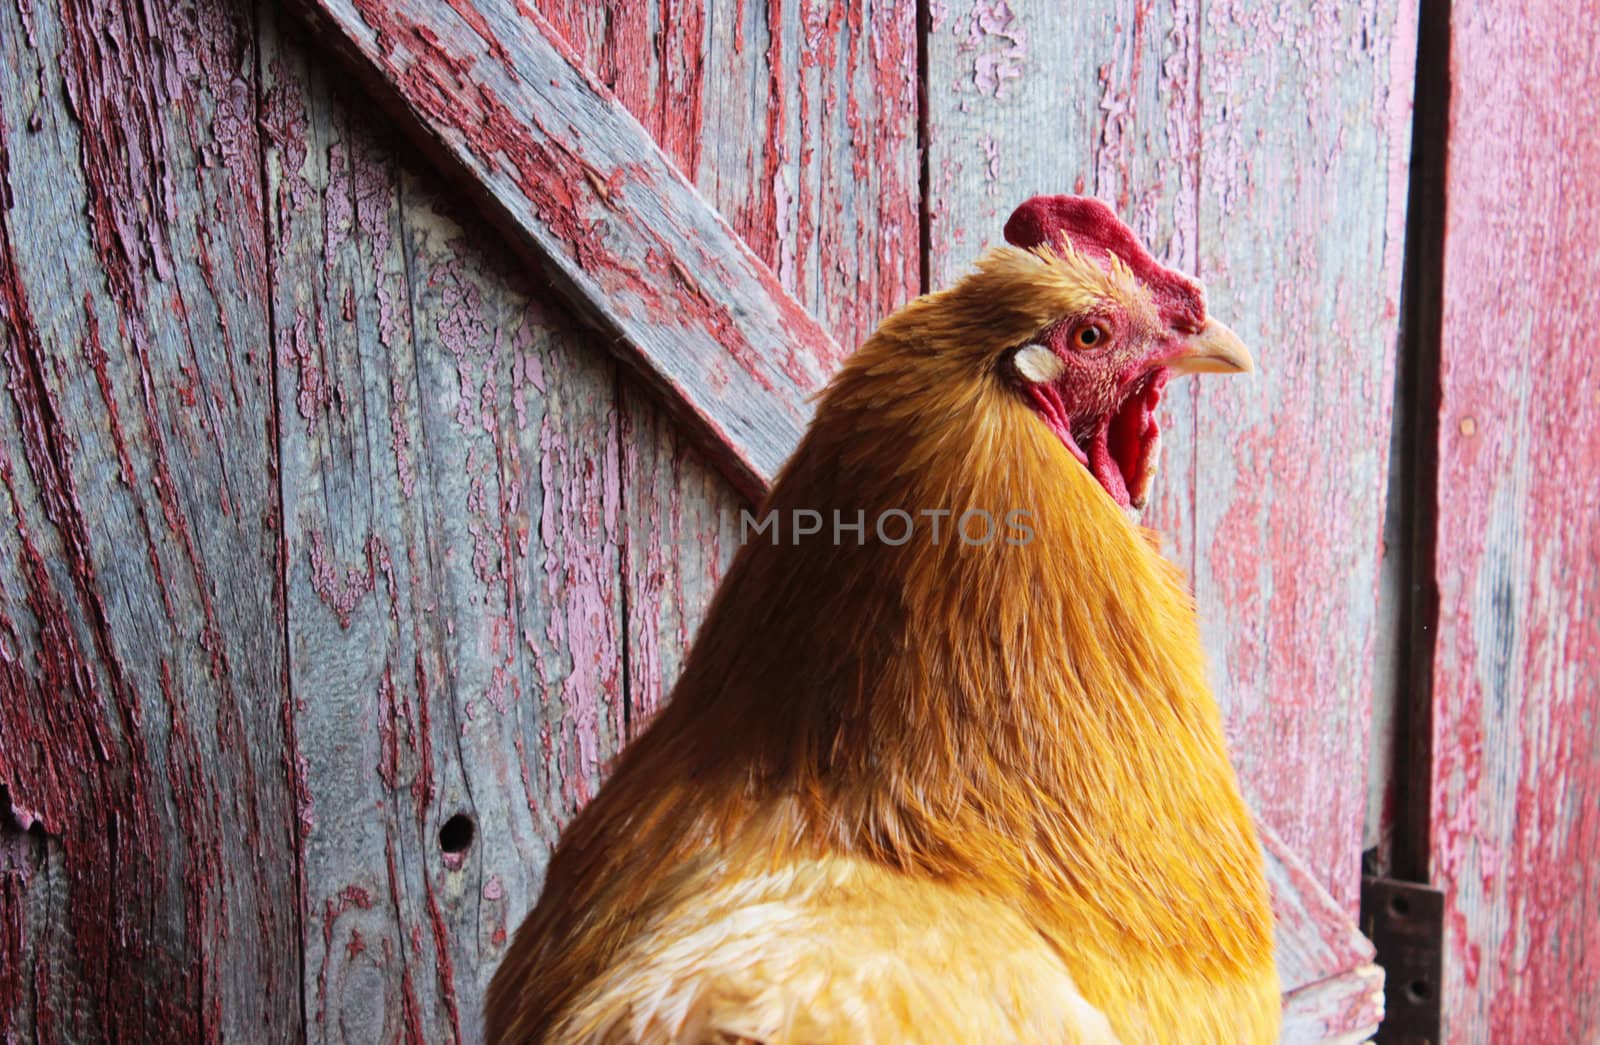 A gold colored rooster in front of a barn door with peeling red paint.